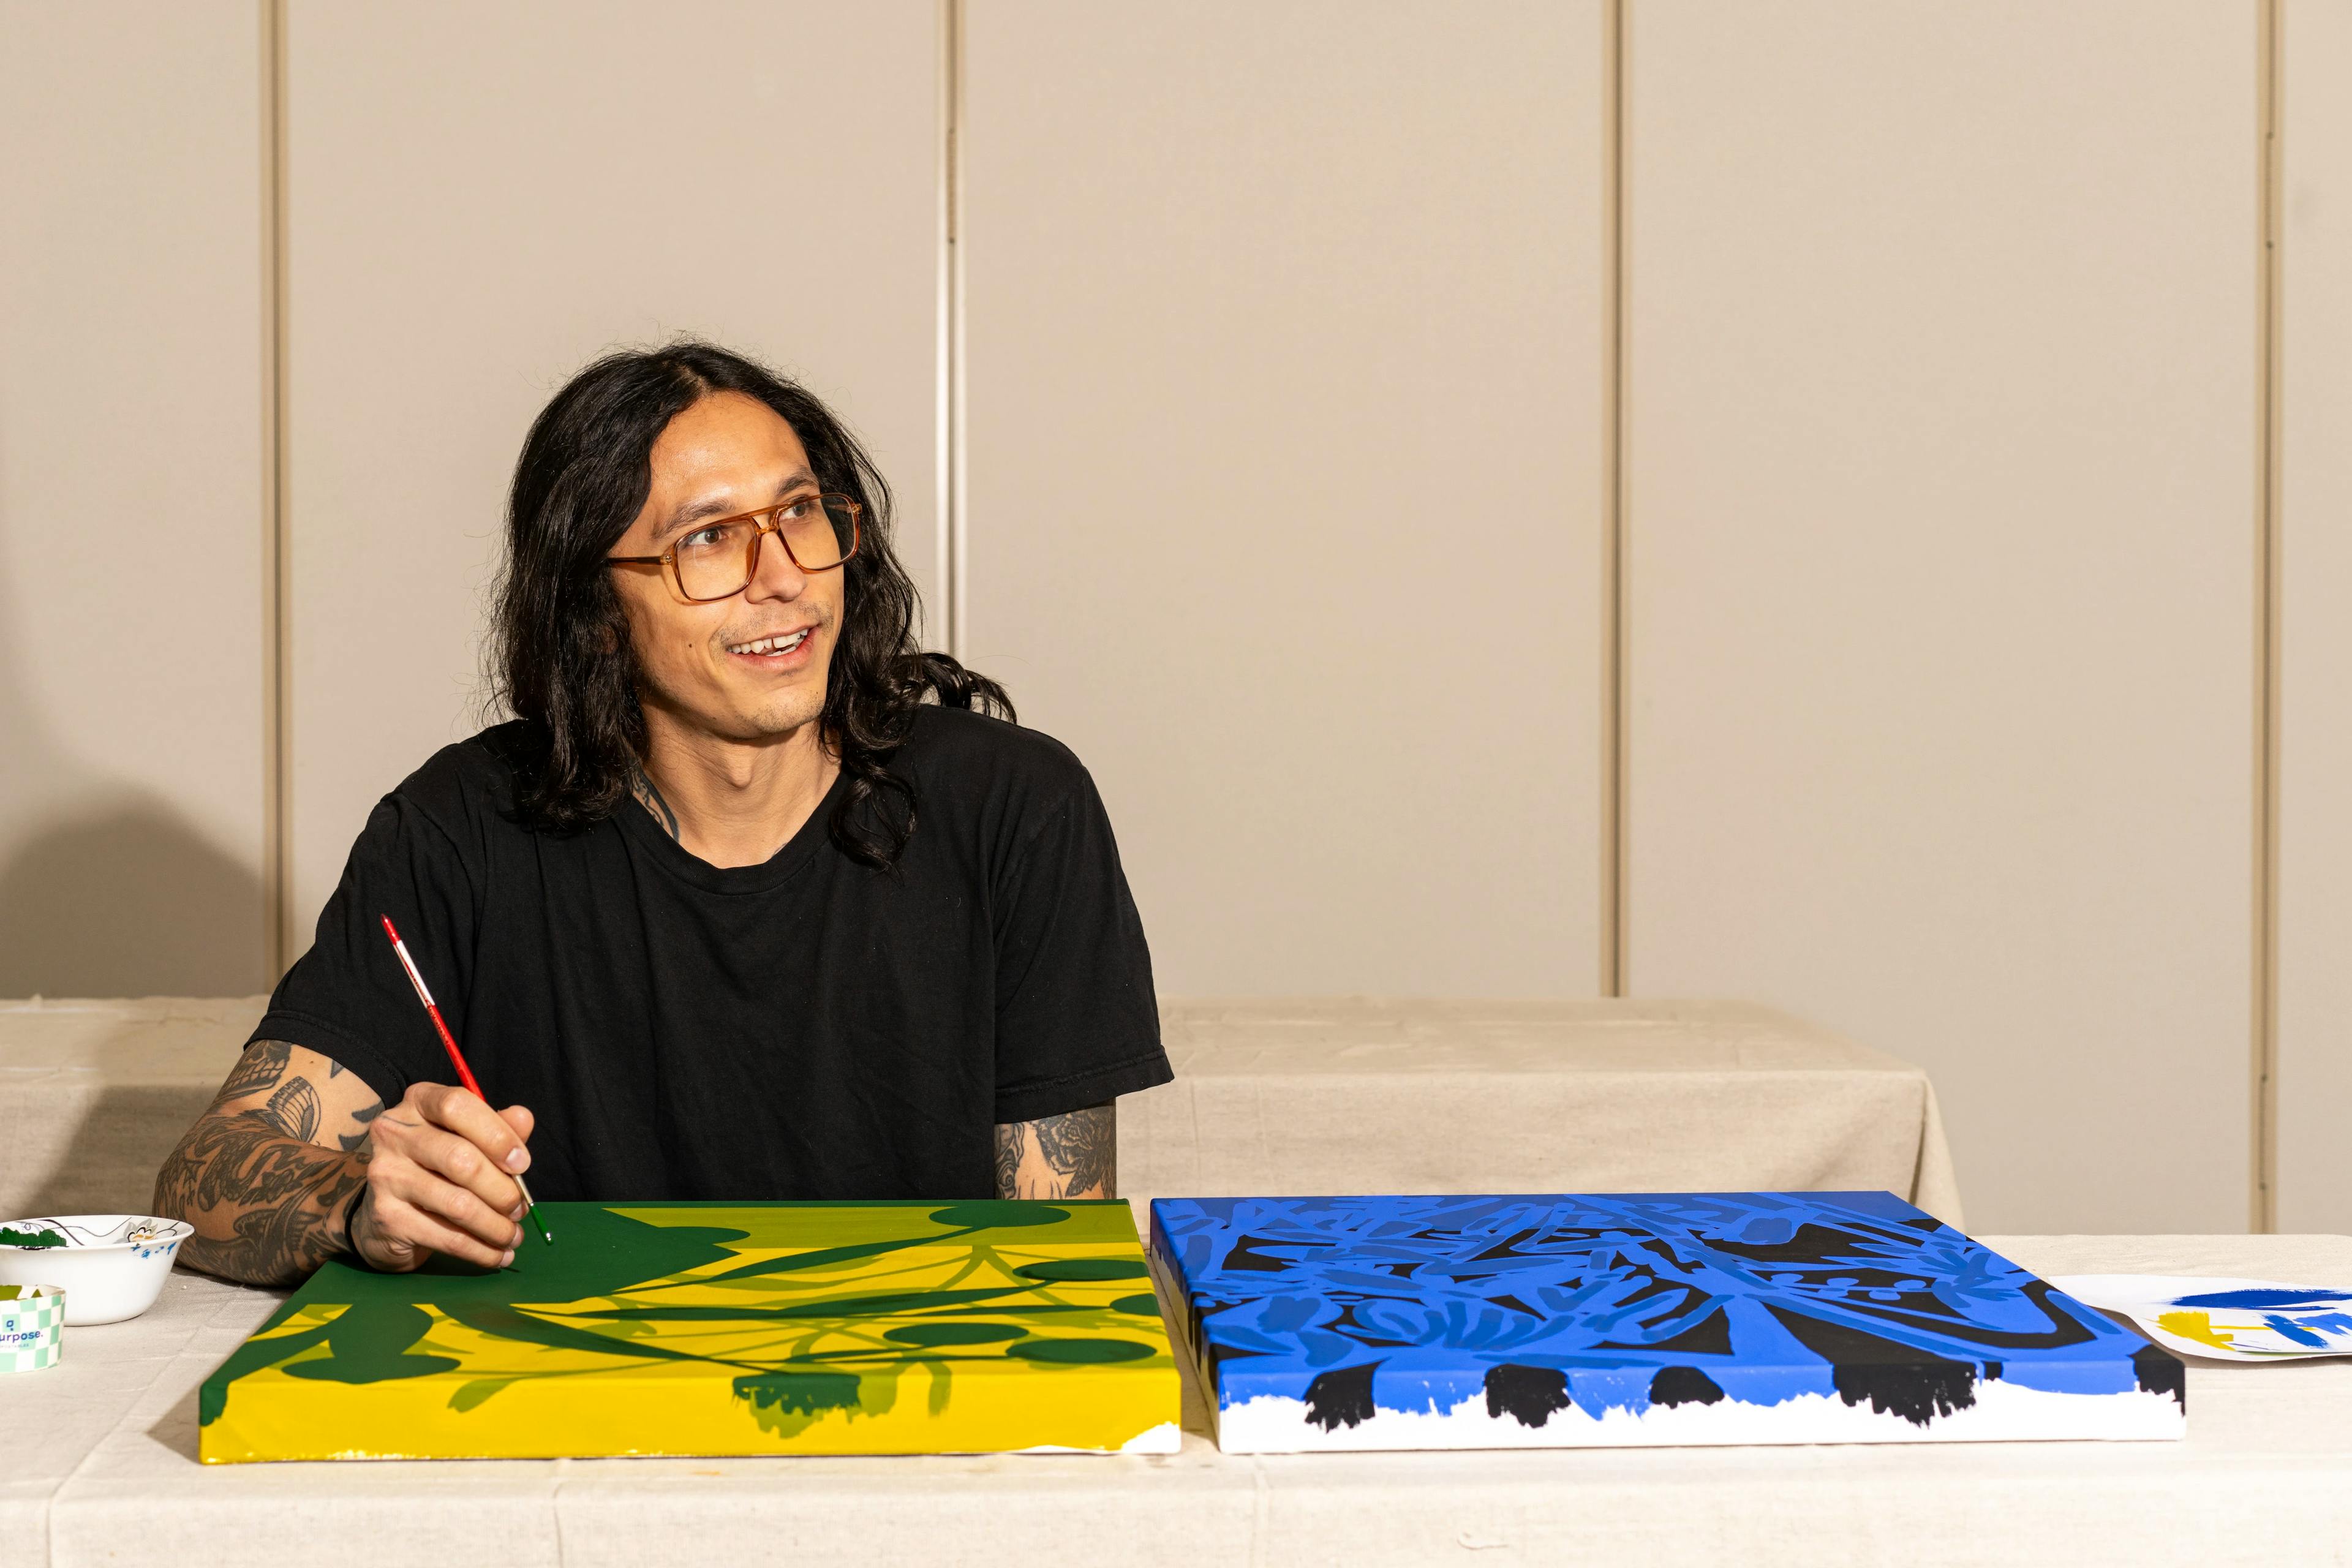 Artist Eddie Perrote painting two canvases, one yellow and one blue, within a studio as part of his Uprise Art x MacArthur Place Residency.